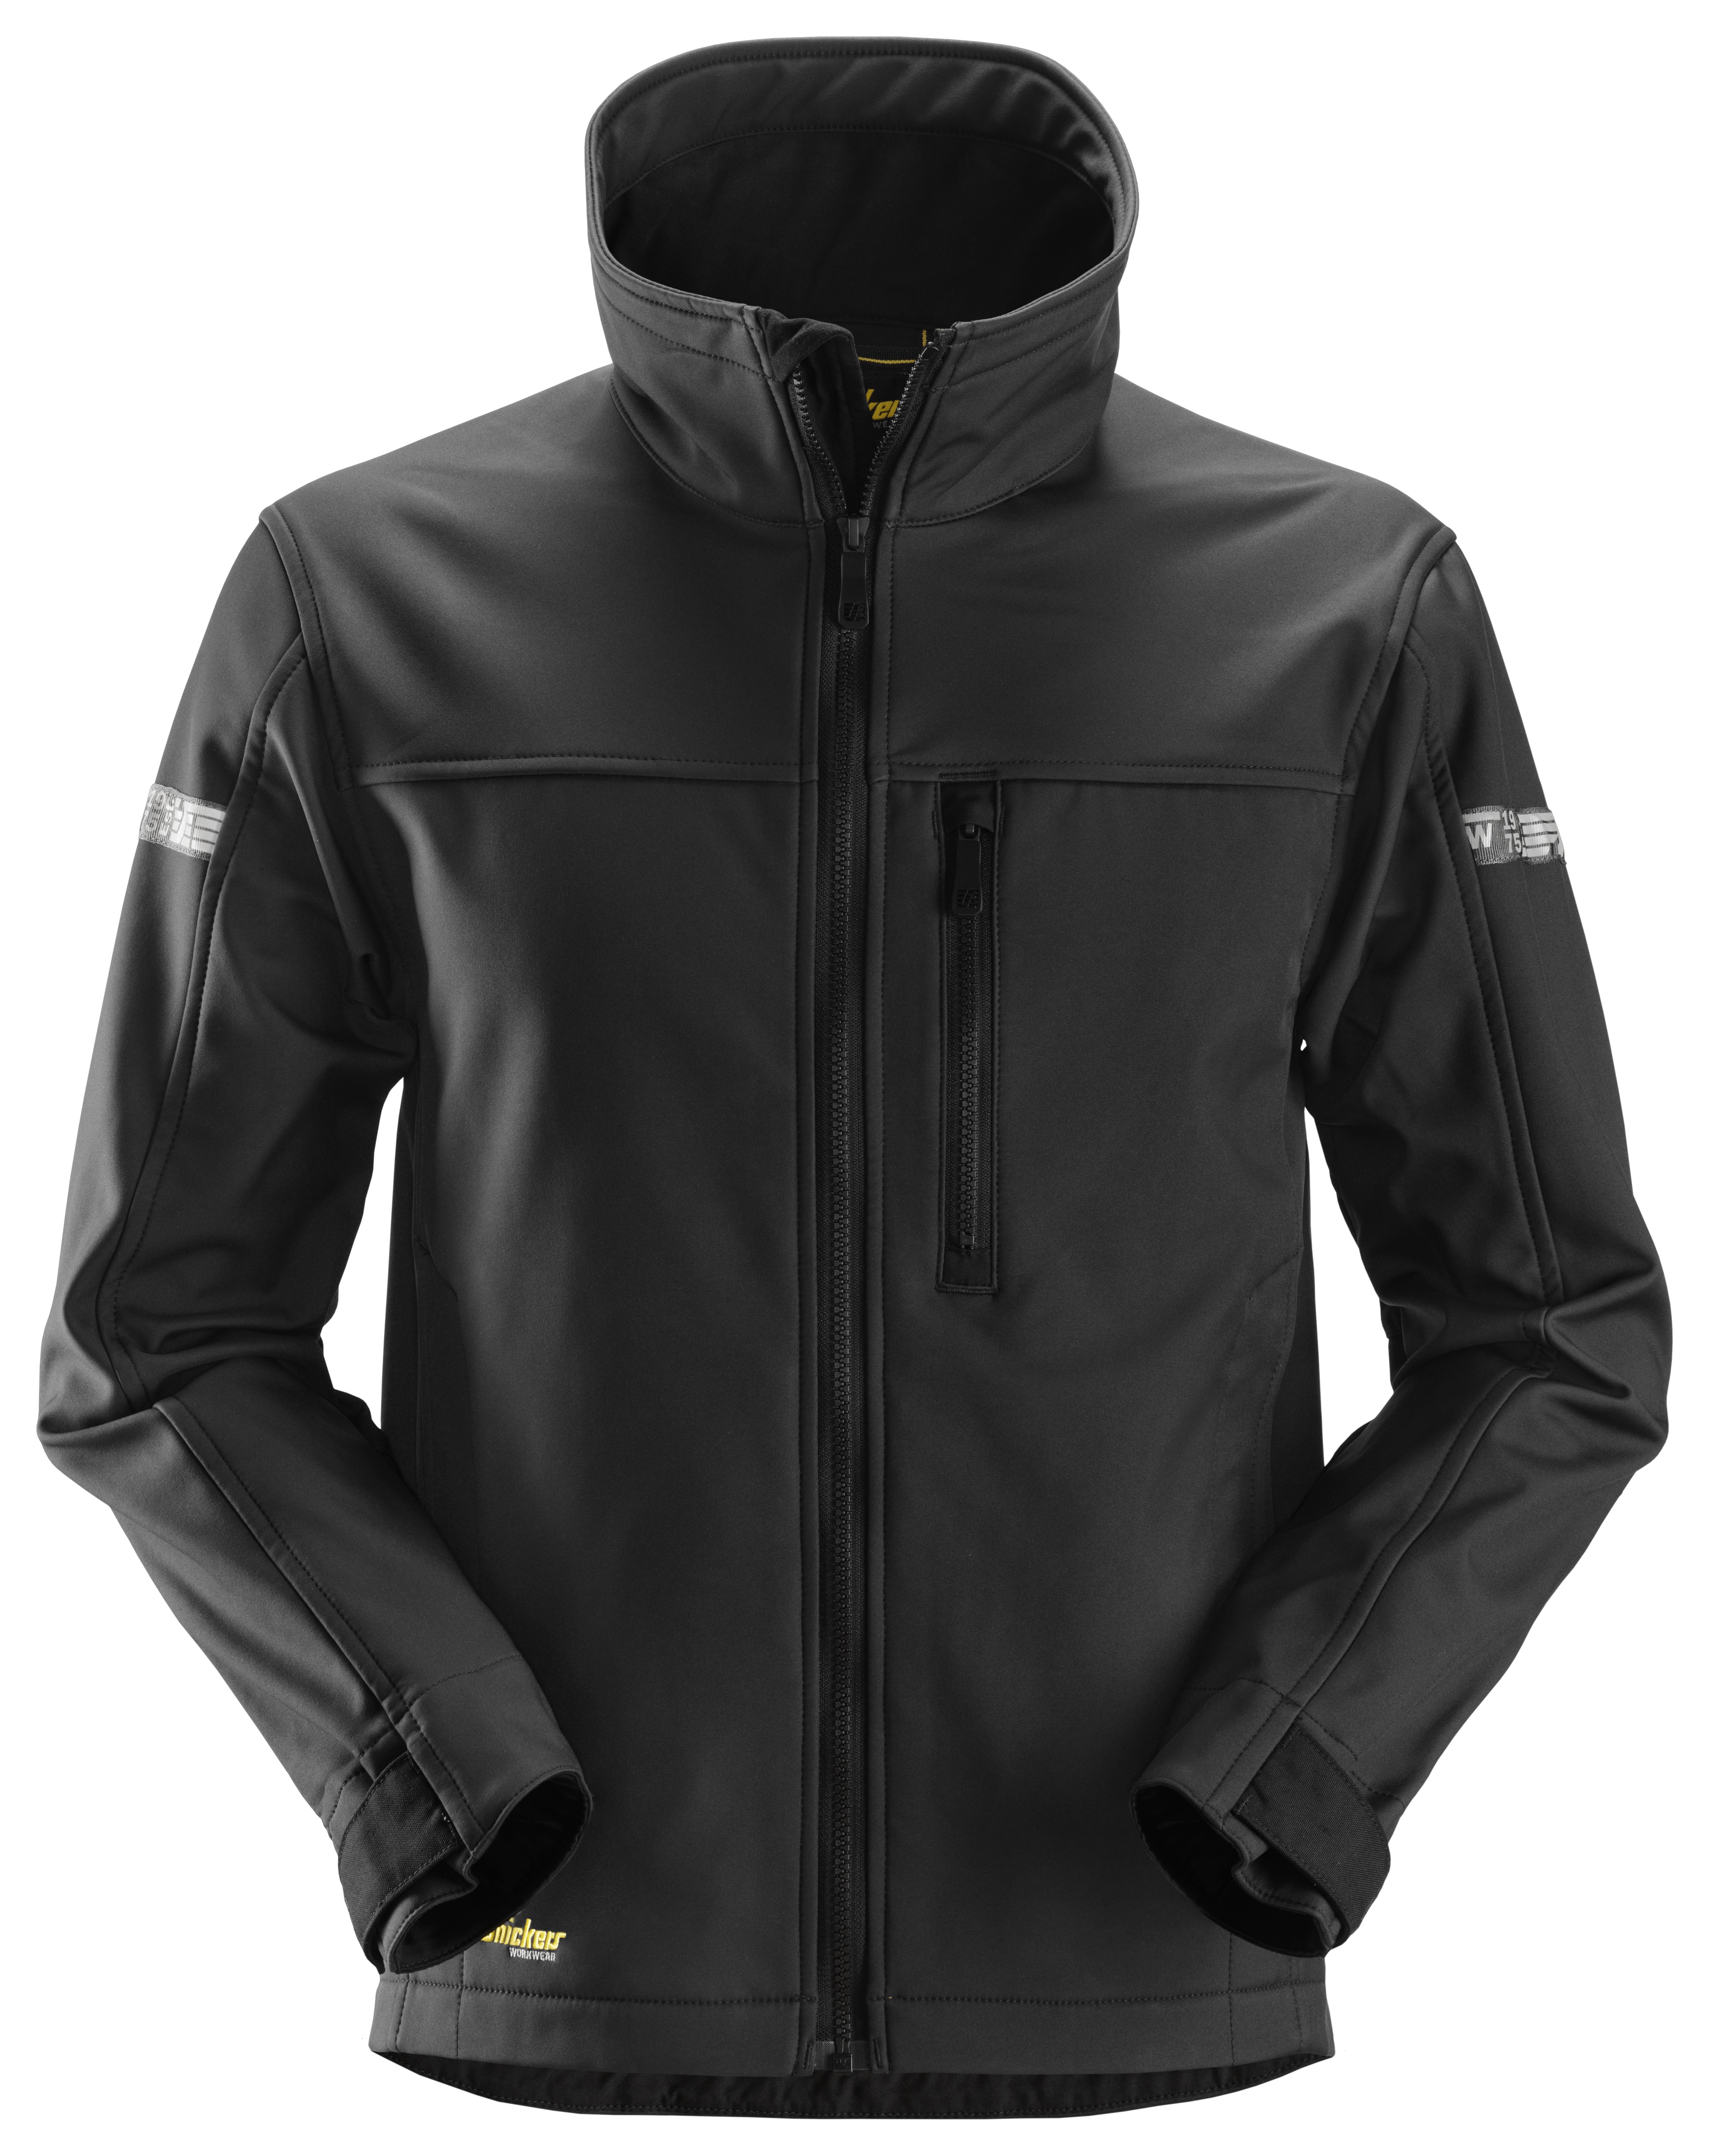 Snickers 1205 - Veste Softshell coupe-vent, Allroundwork